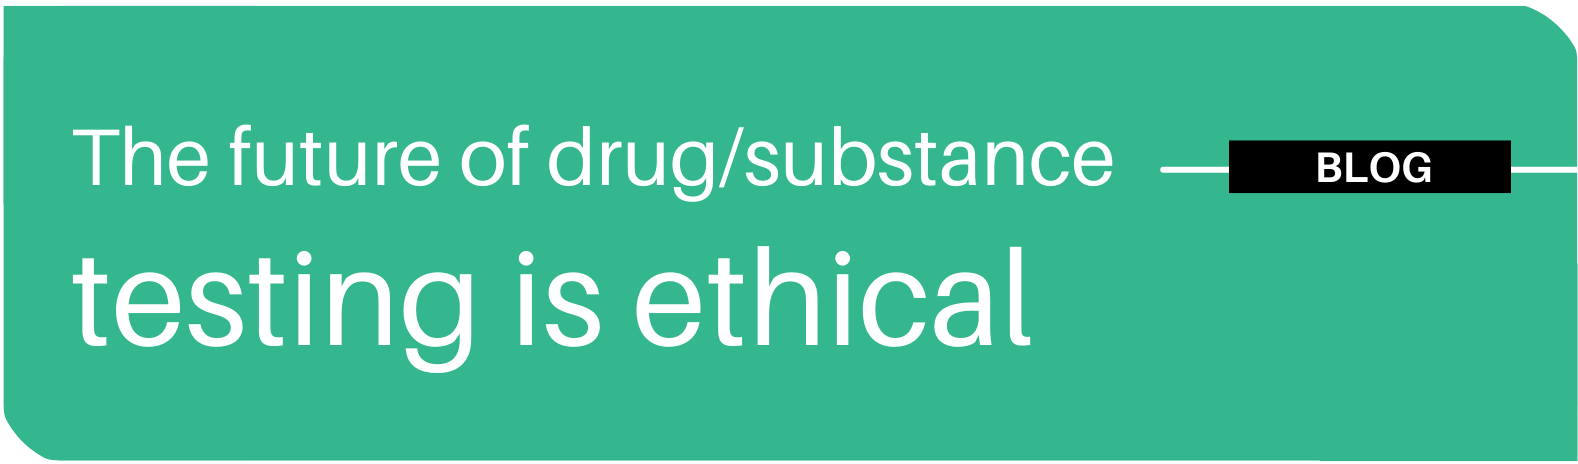 The future of drug and substance testing is ethical